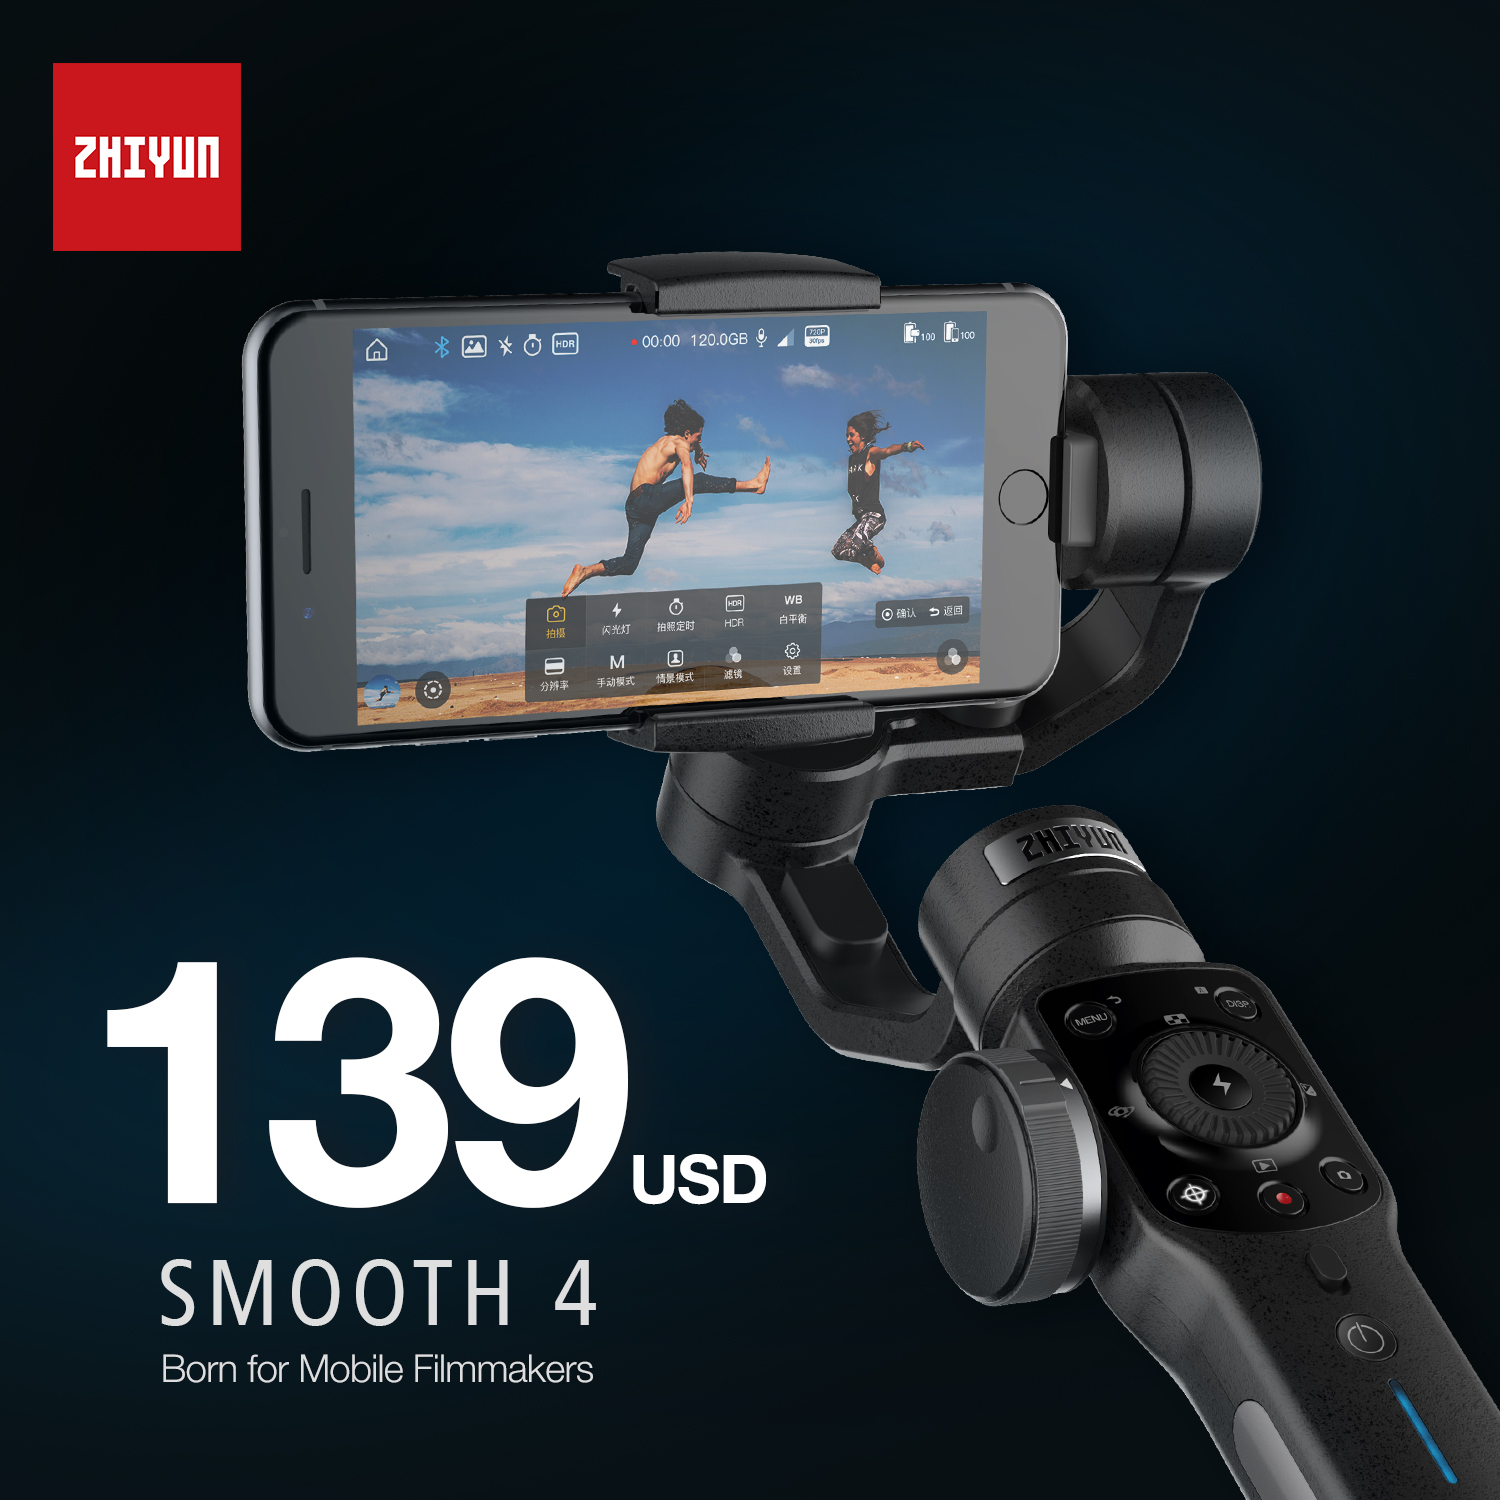 Zhiyun-Smooth-4-Brushless-3-Axis-Handheld-Gimbal-Stabilizer-For-All-Phones-Phone-Filmmakers-1272480